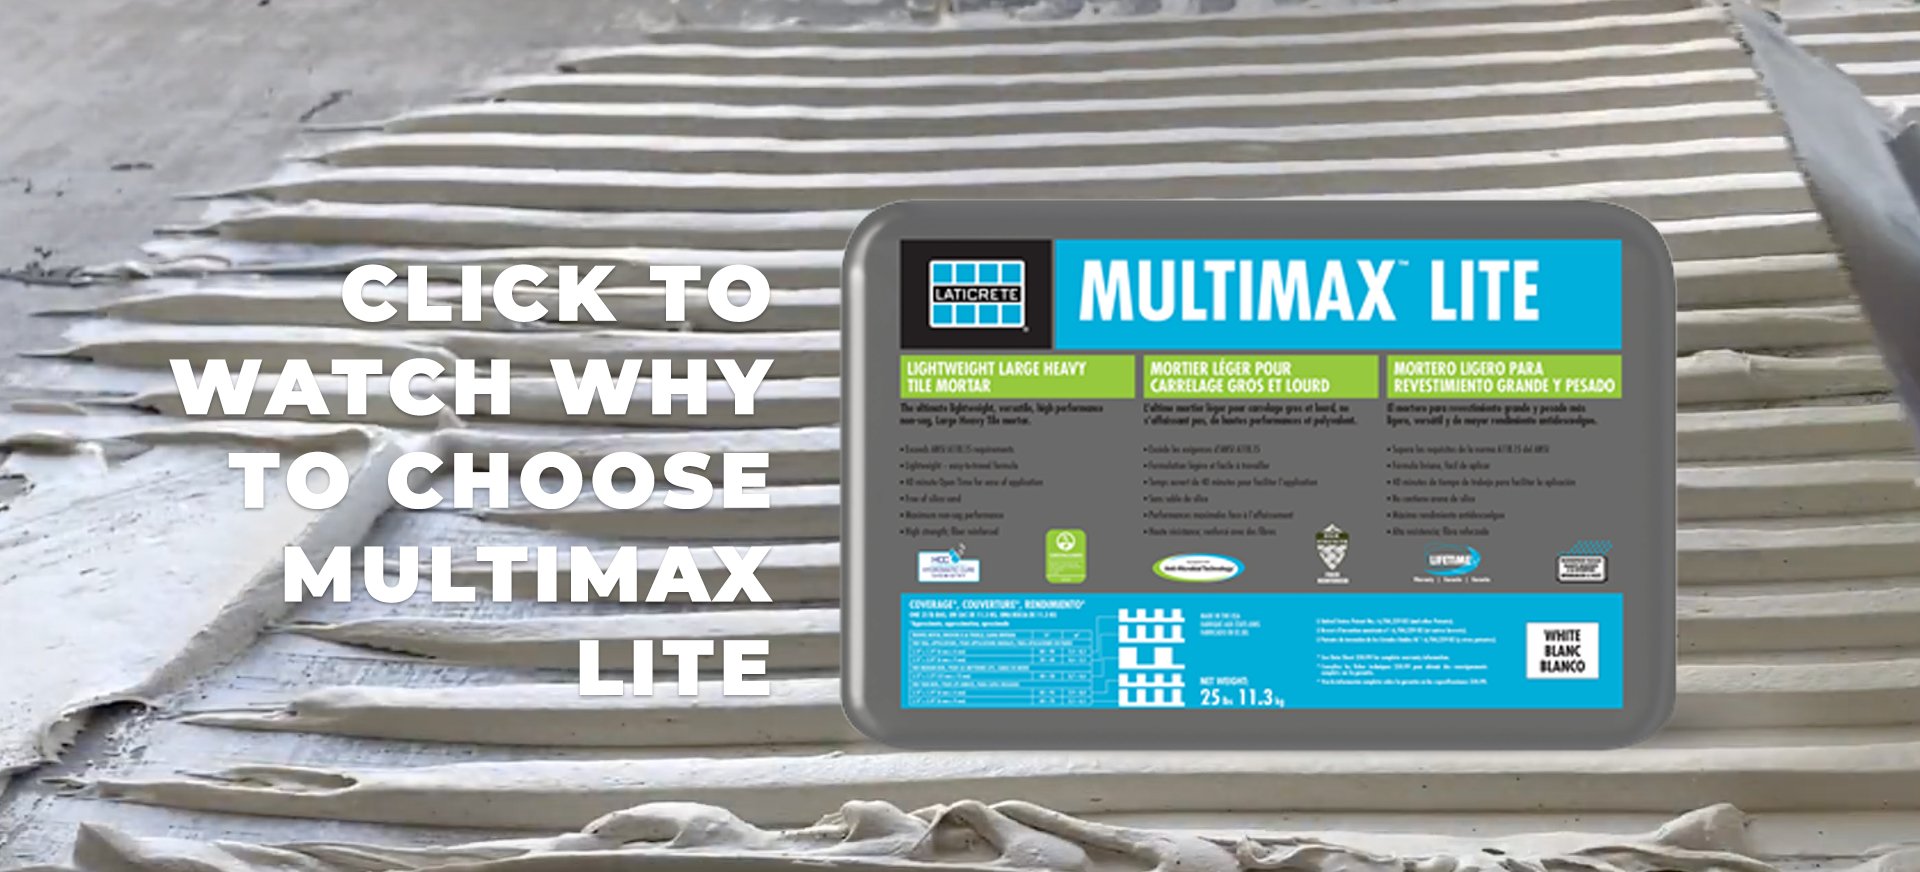 Multimax Click to watch